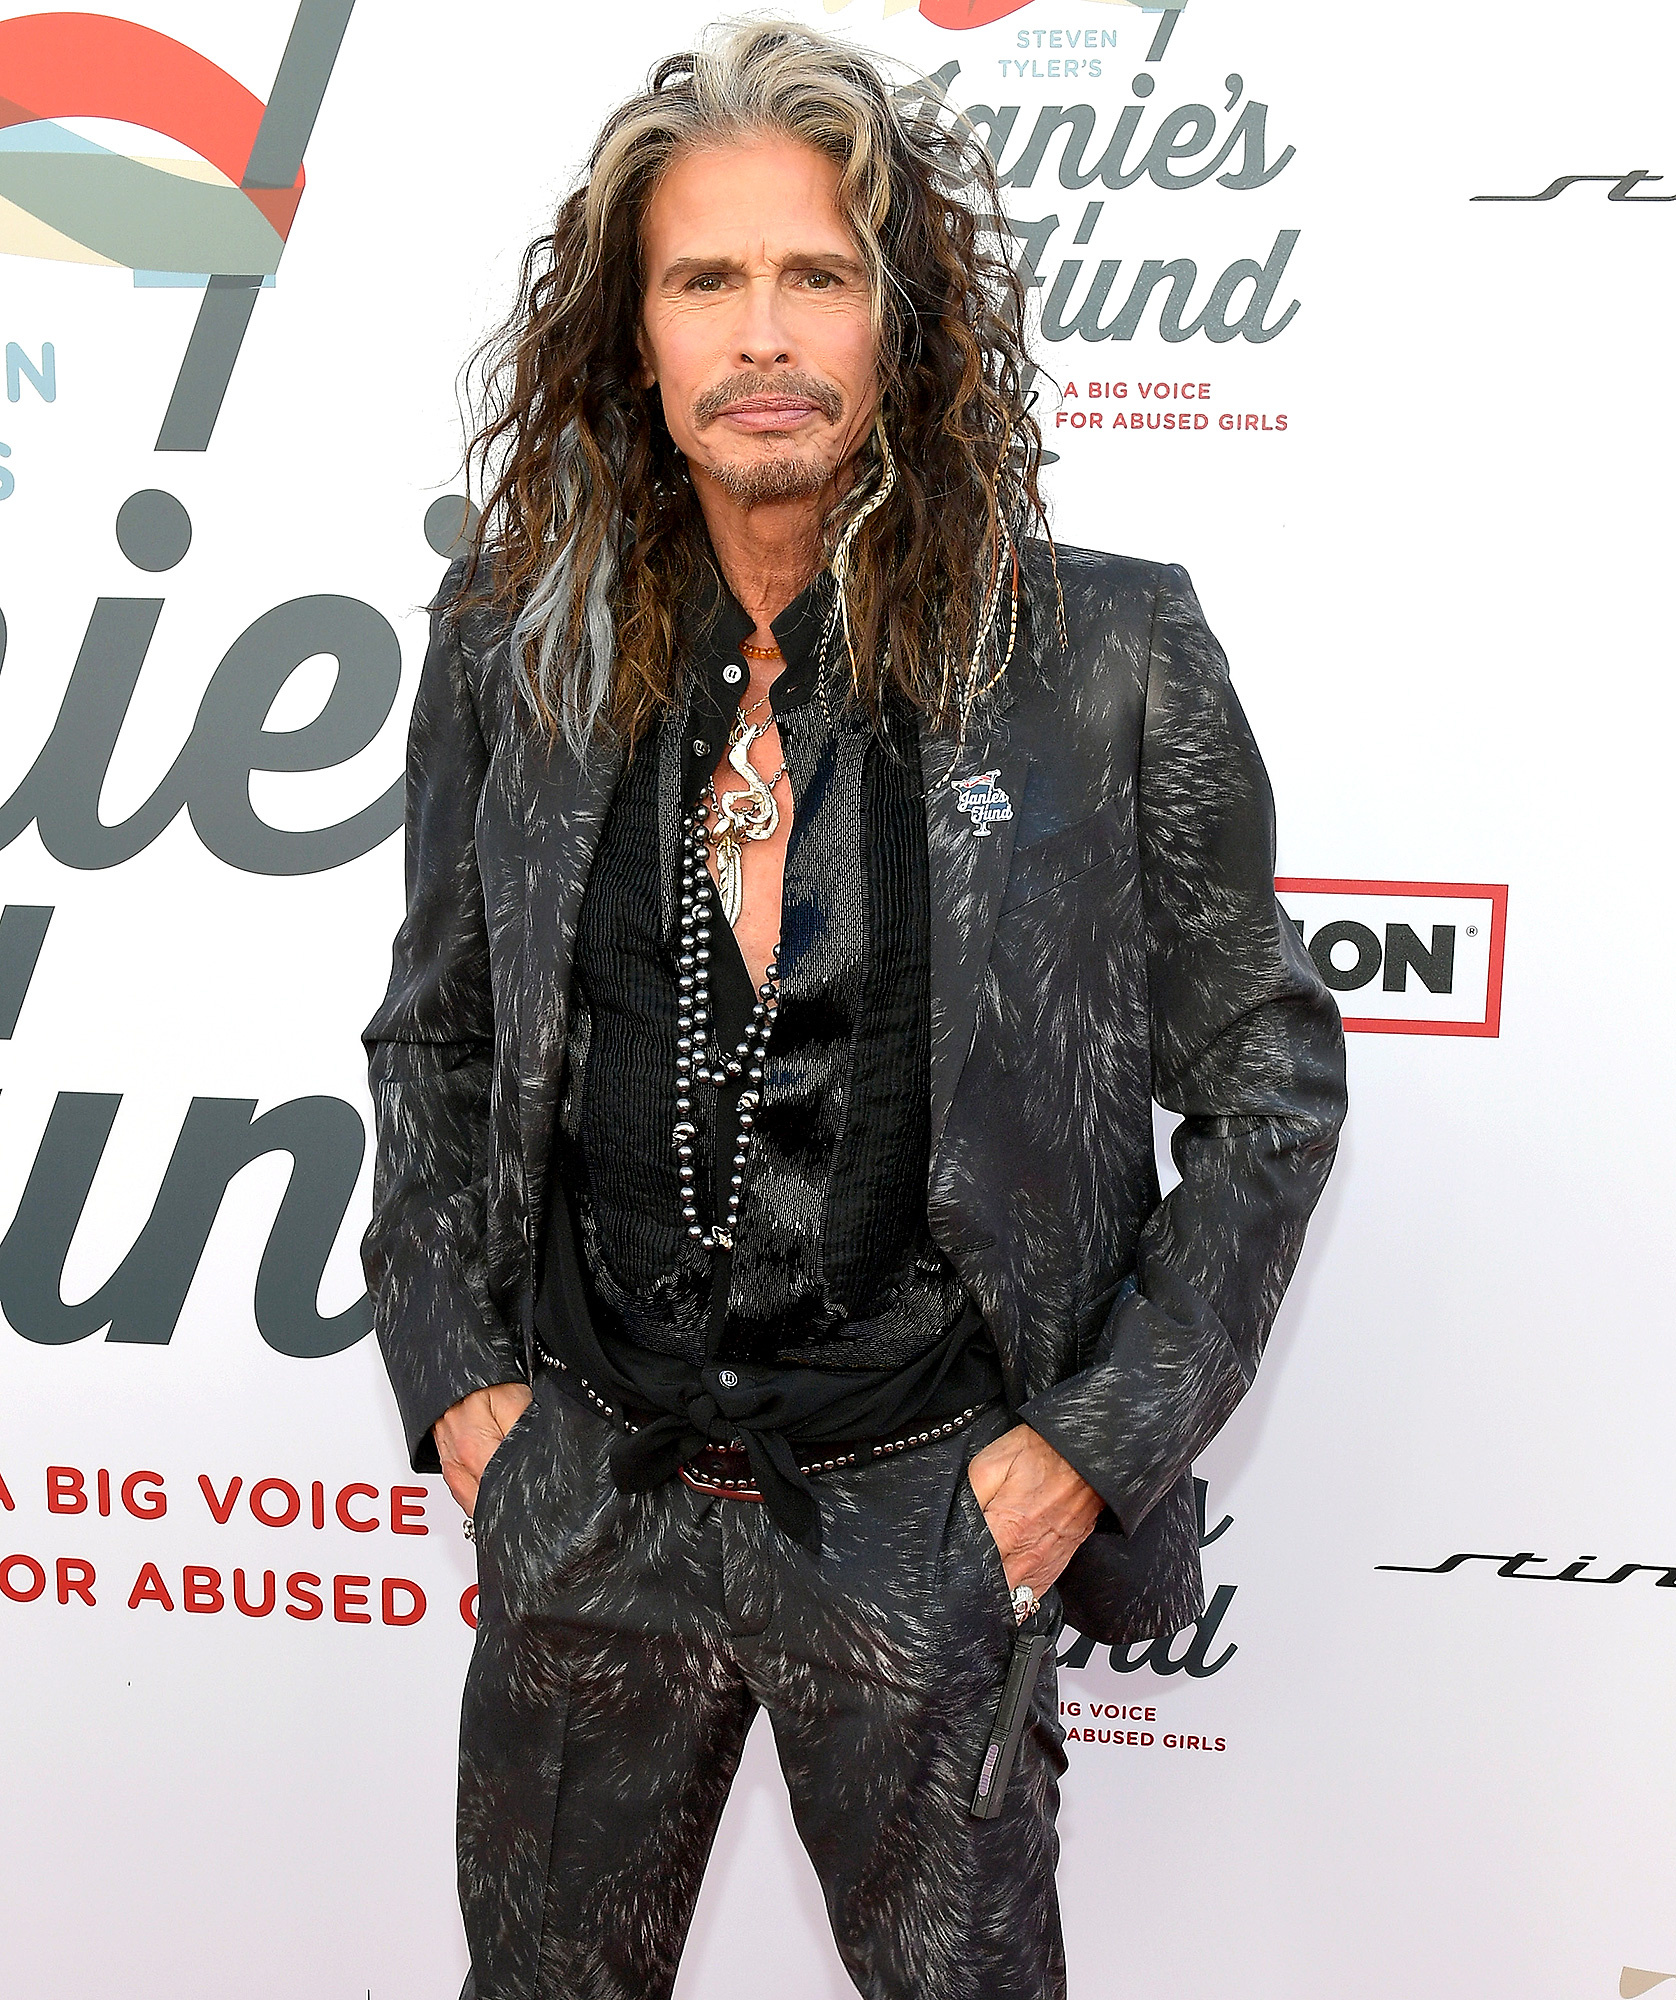 Steven Tyler, Center for abused girls, Ultra magazine feature, Humanitarianism, 1680x2000 HD Handy